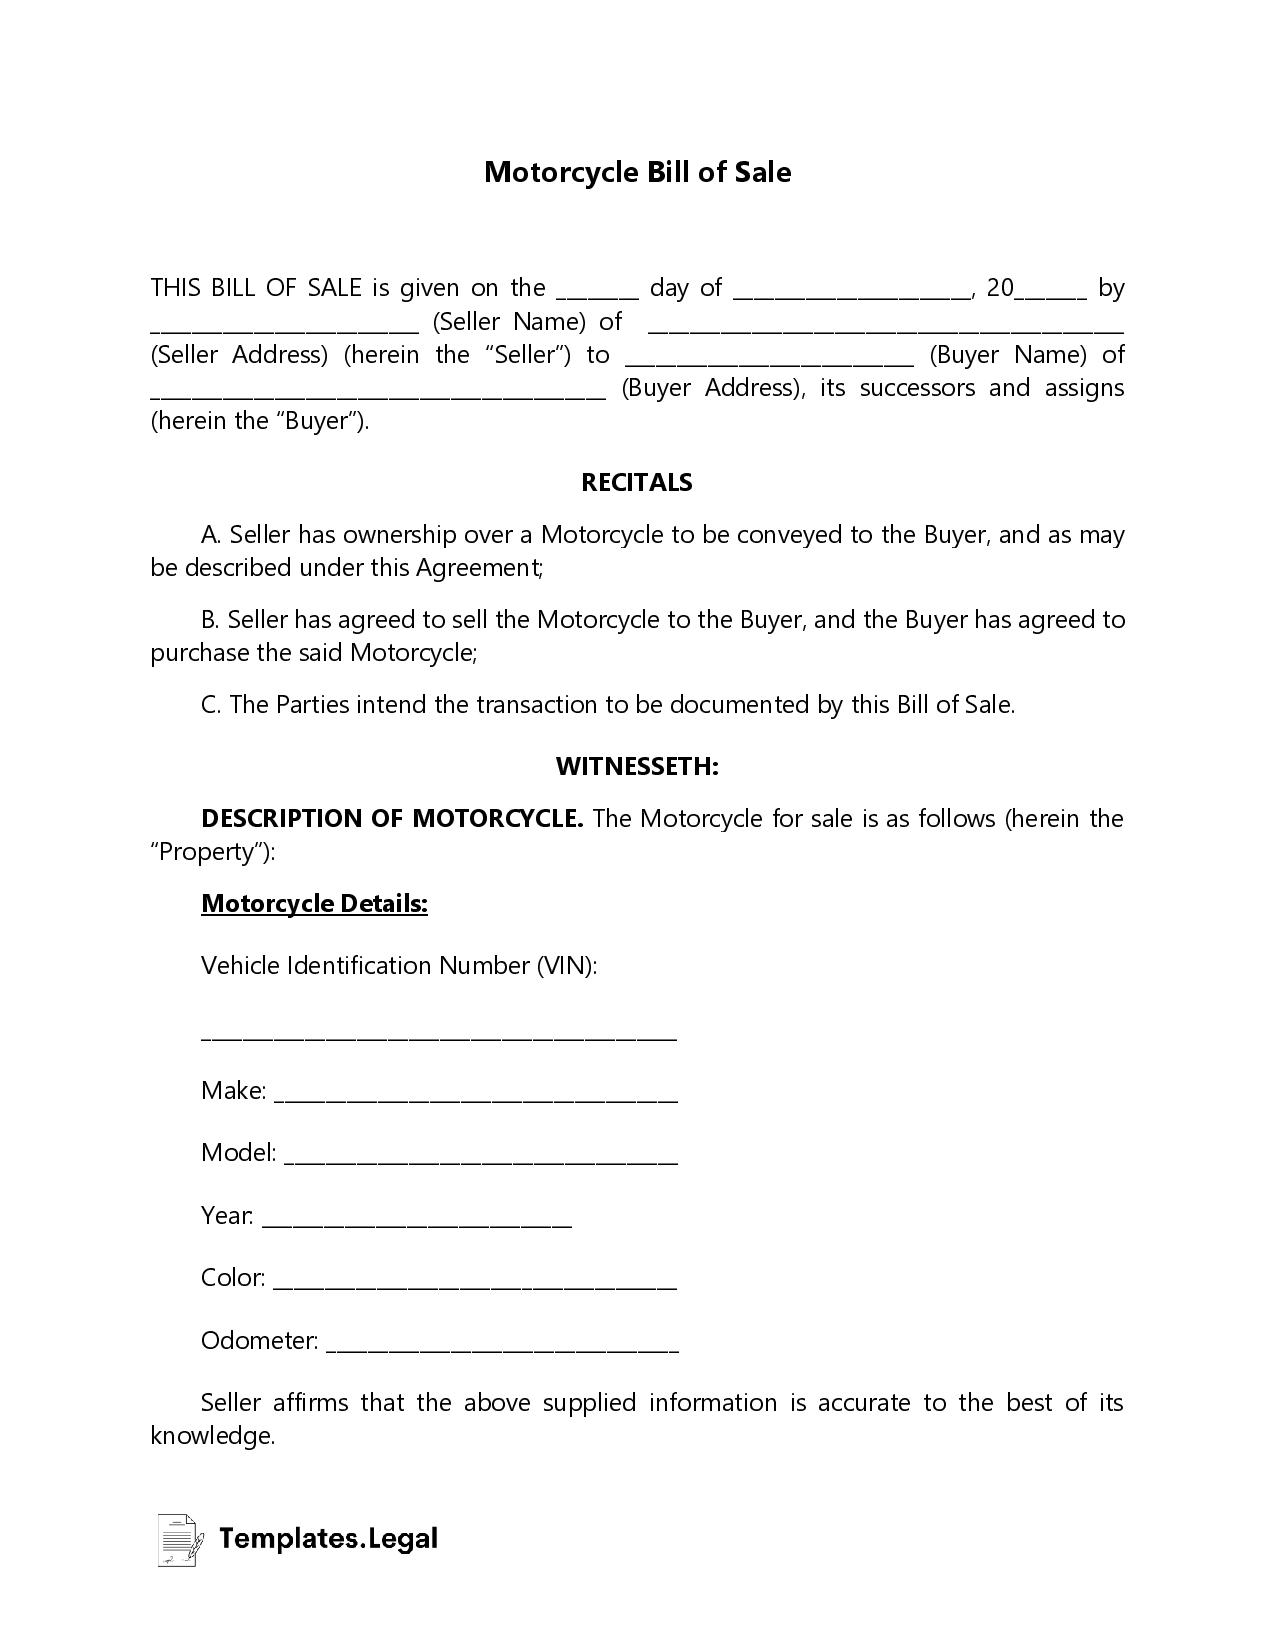 Motorcycle Bill of Sale - Templates.Legal